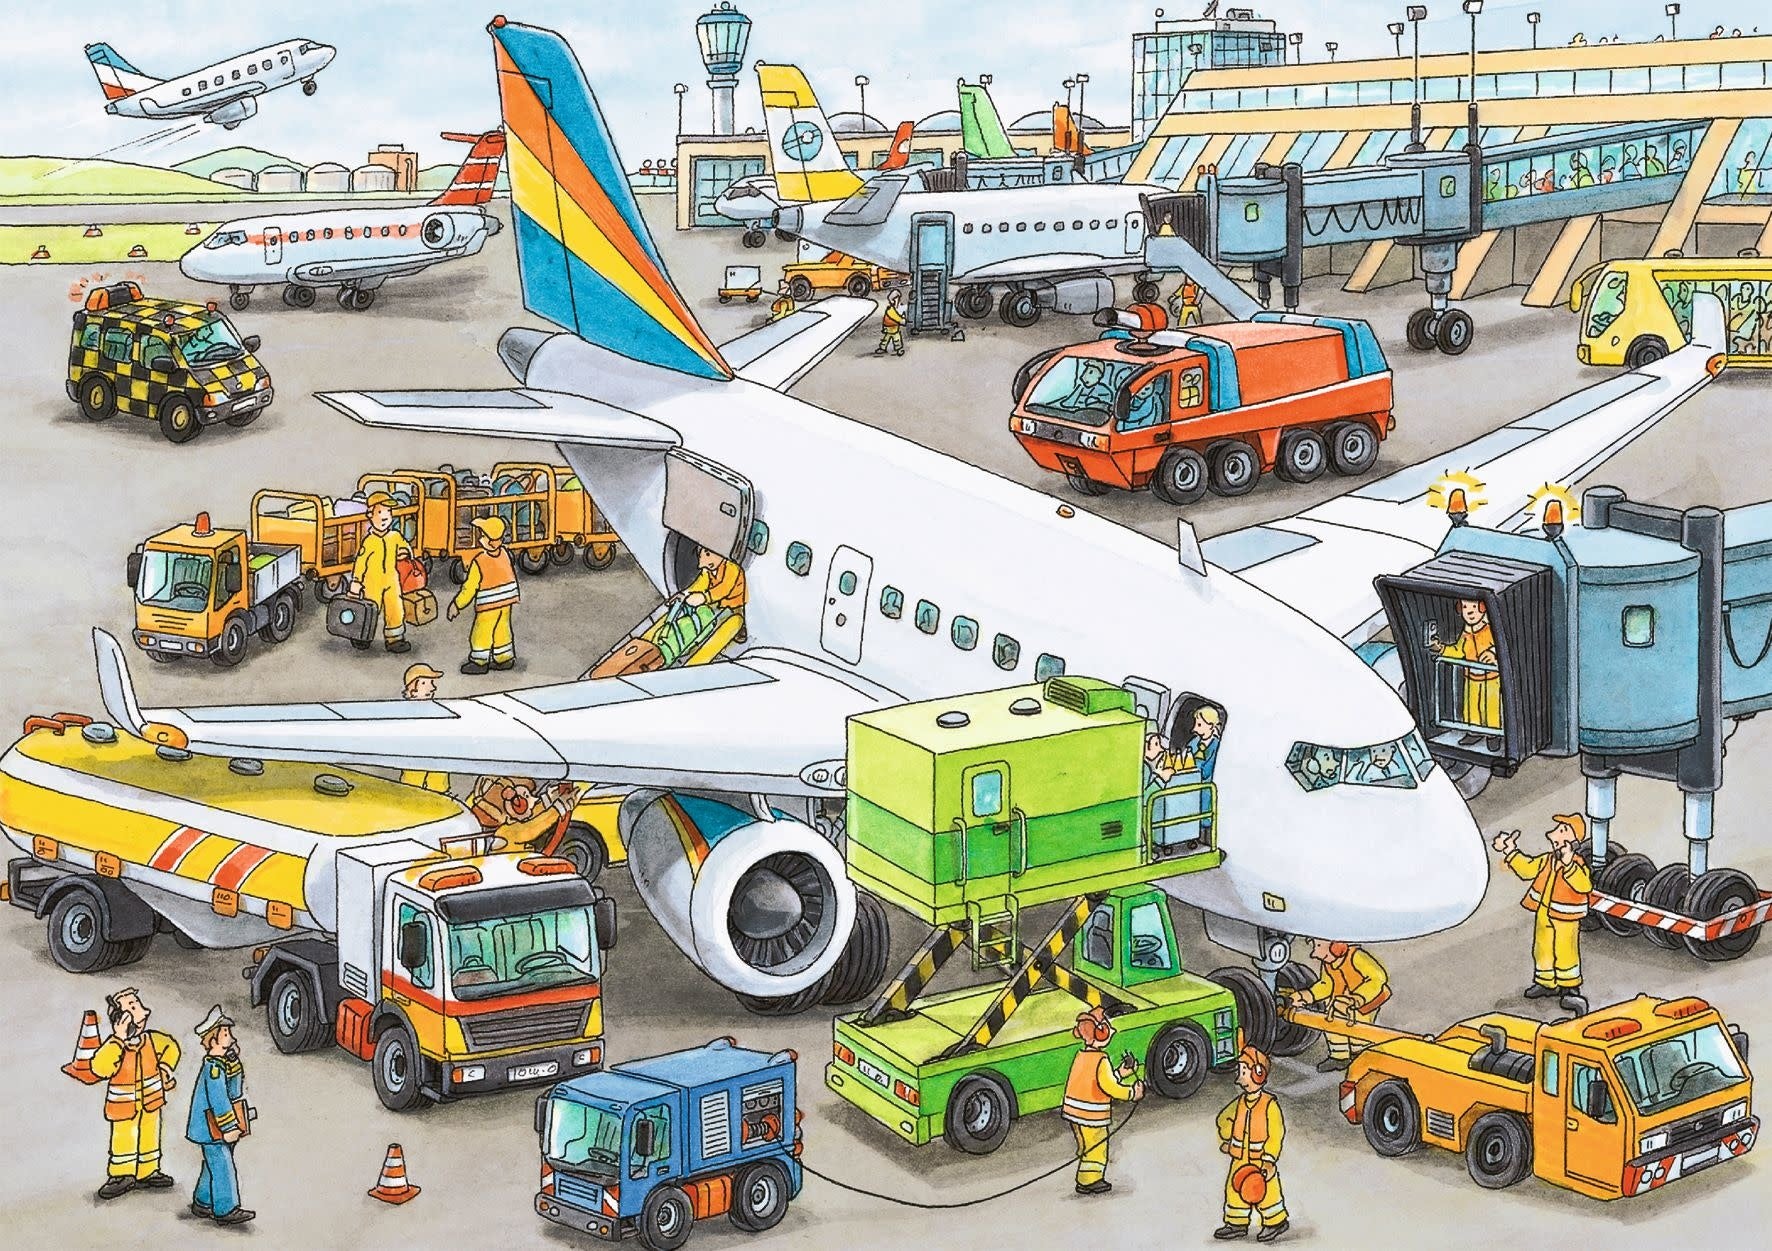 Busy Airport 35pc Puzzle